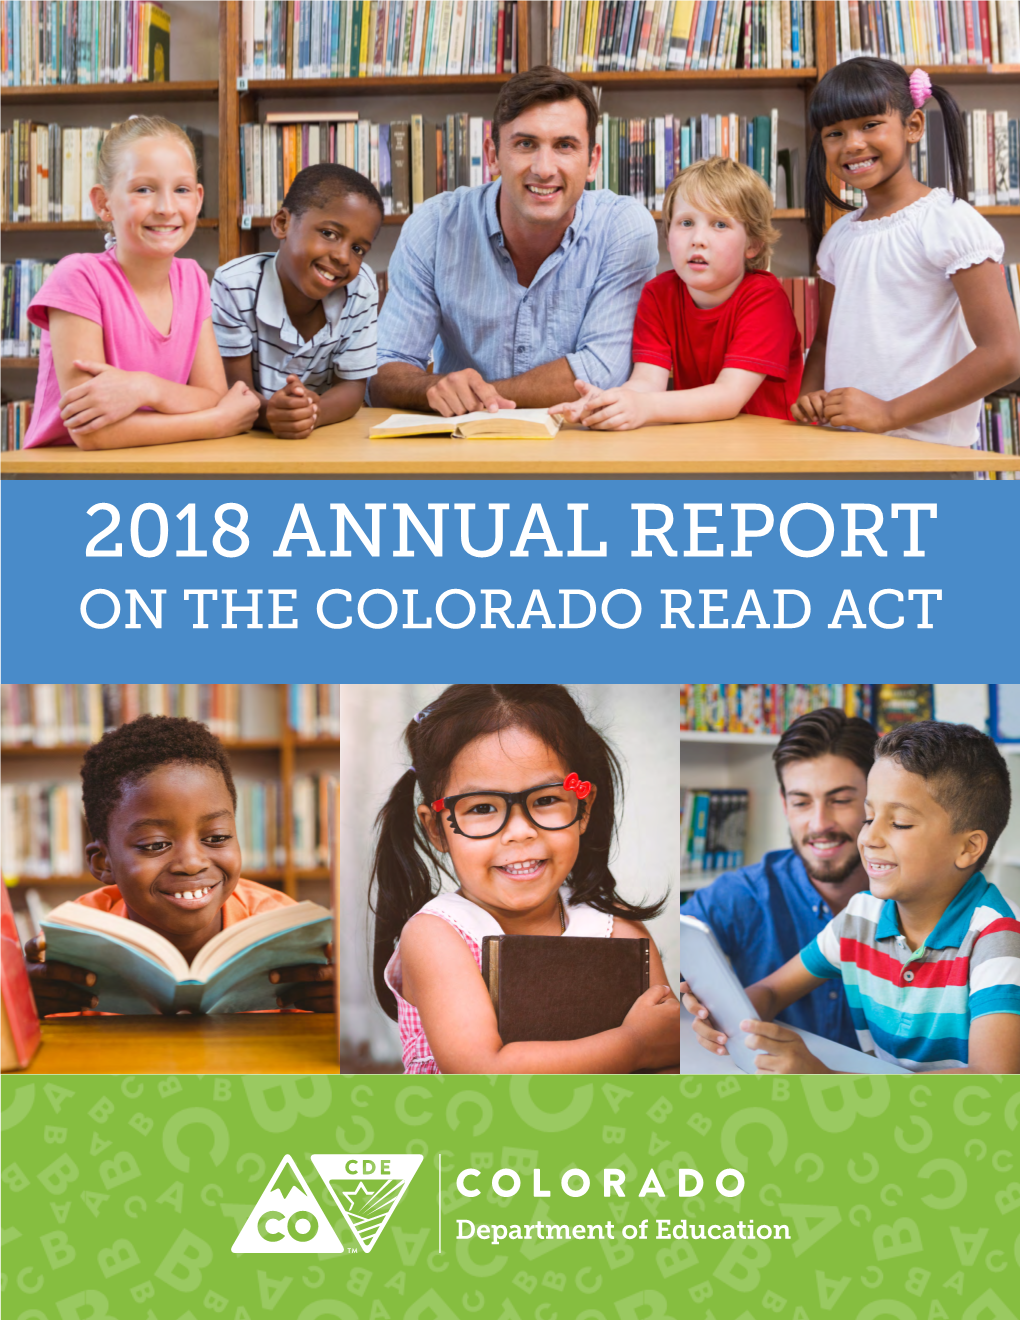 2018 Annual Report on the Colorado Read Act